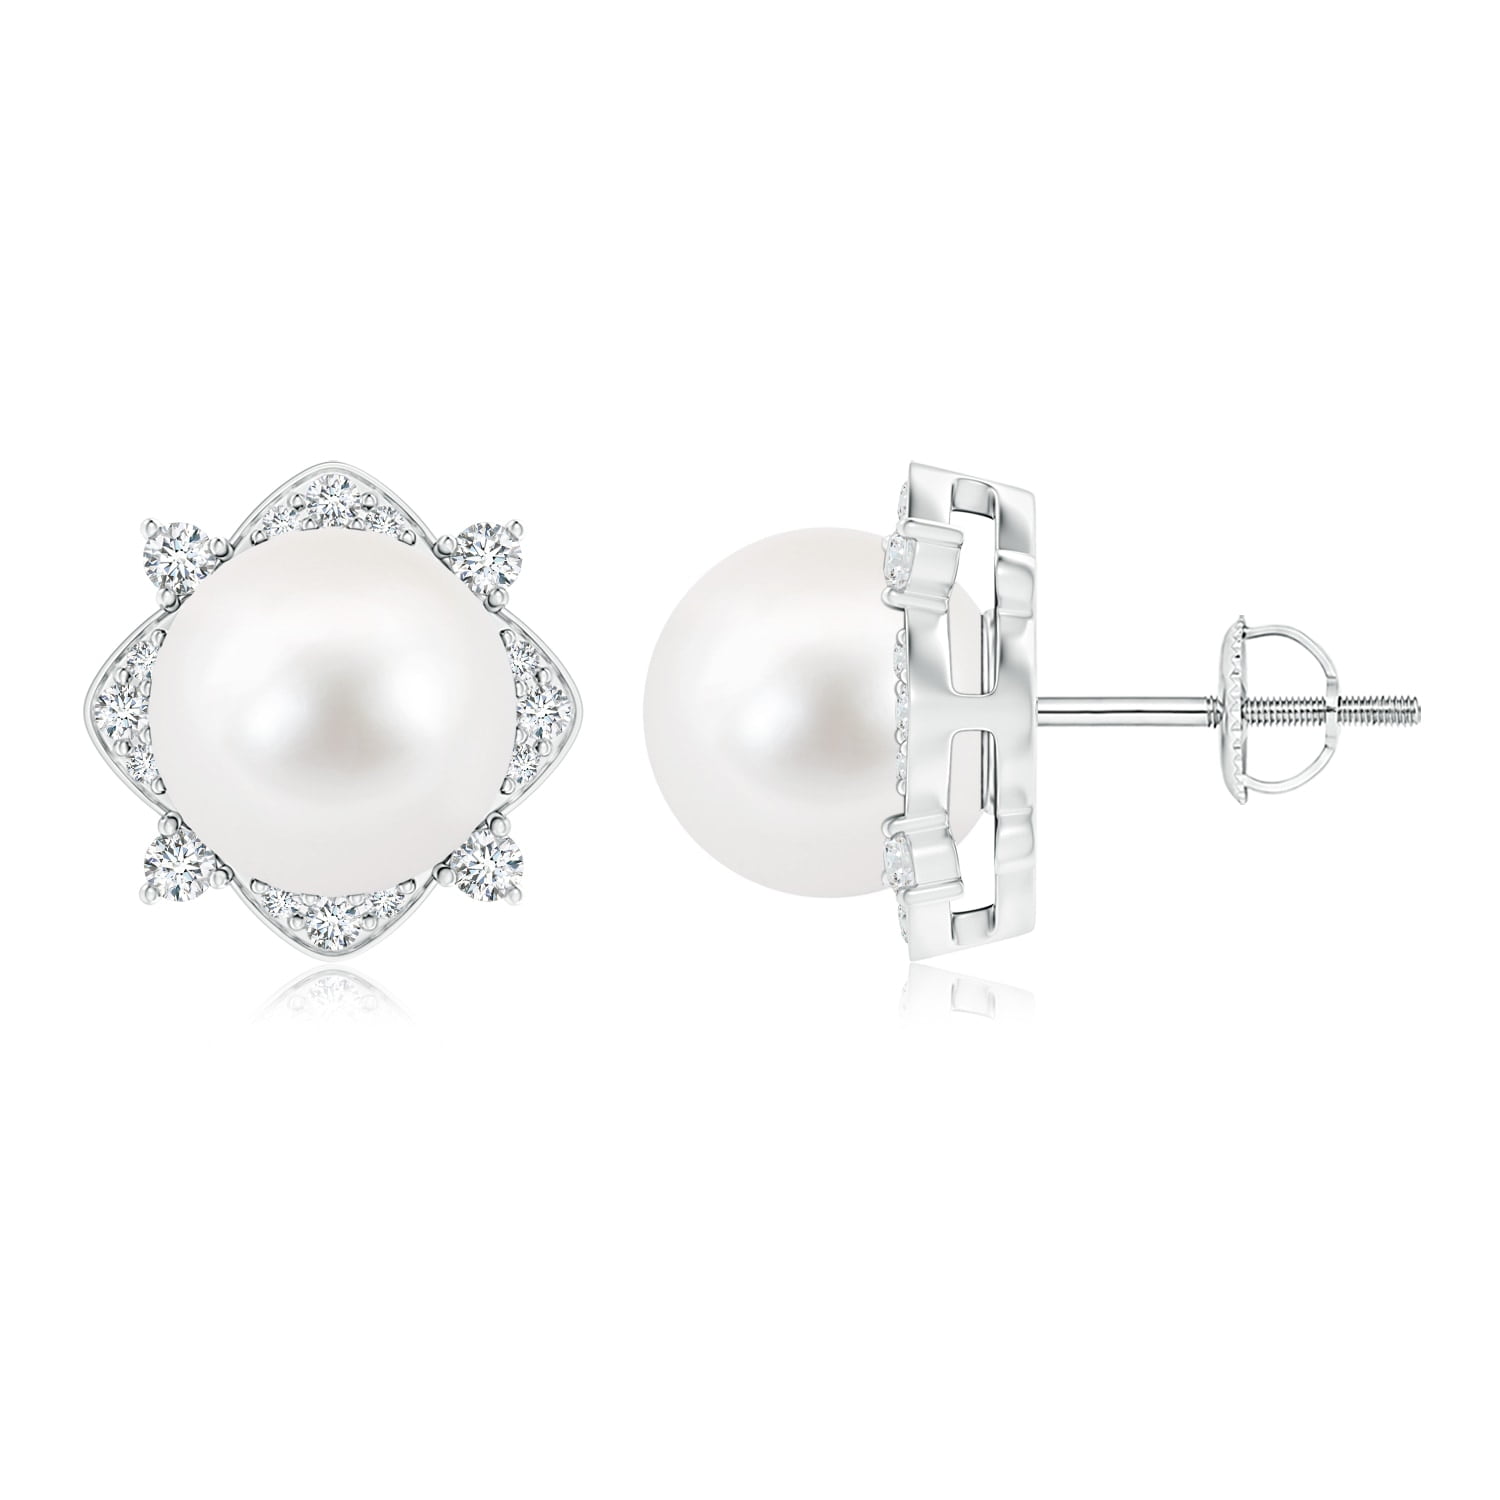 10mm Freshwater Cultured Pearl Classic Freshwater Cultured Pearl Solitaire Studs Earrings for Women